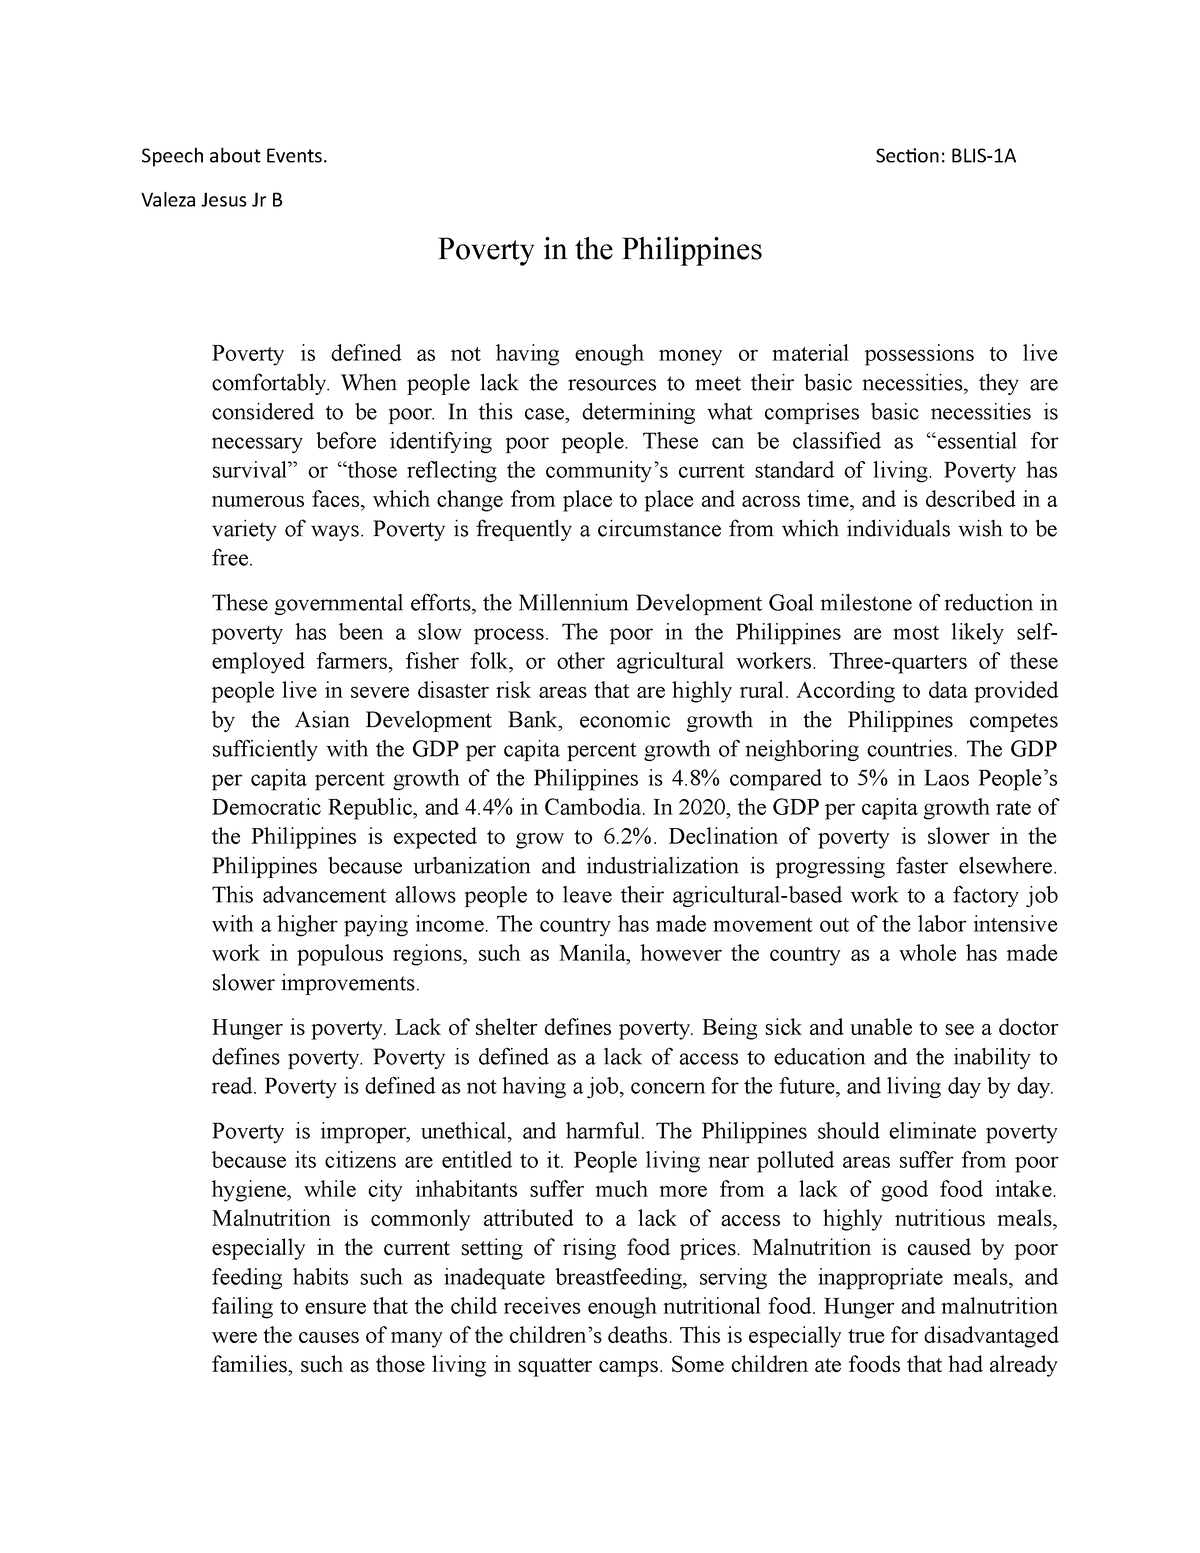 persuasive speech about poverty in the philippines